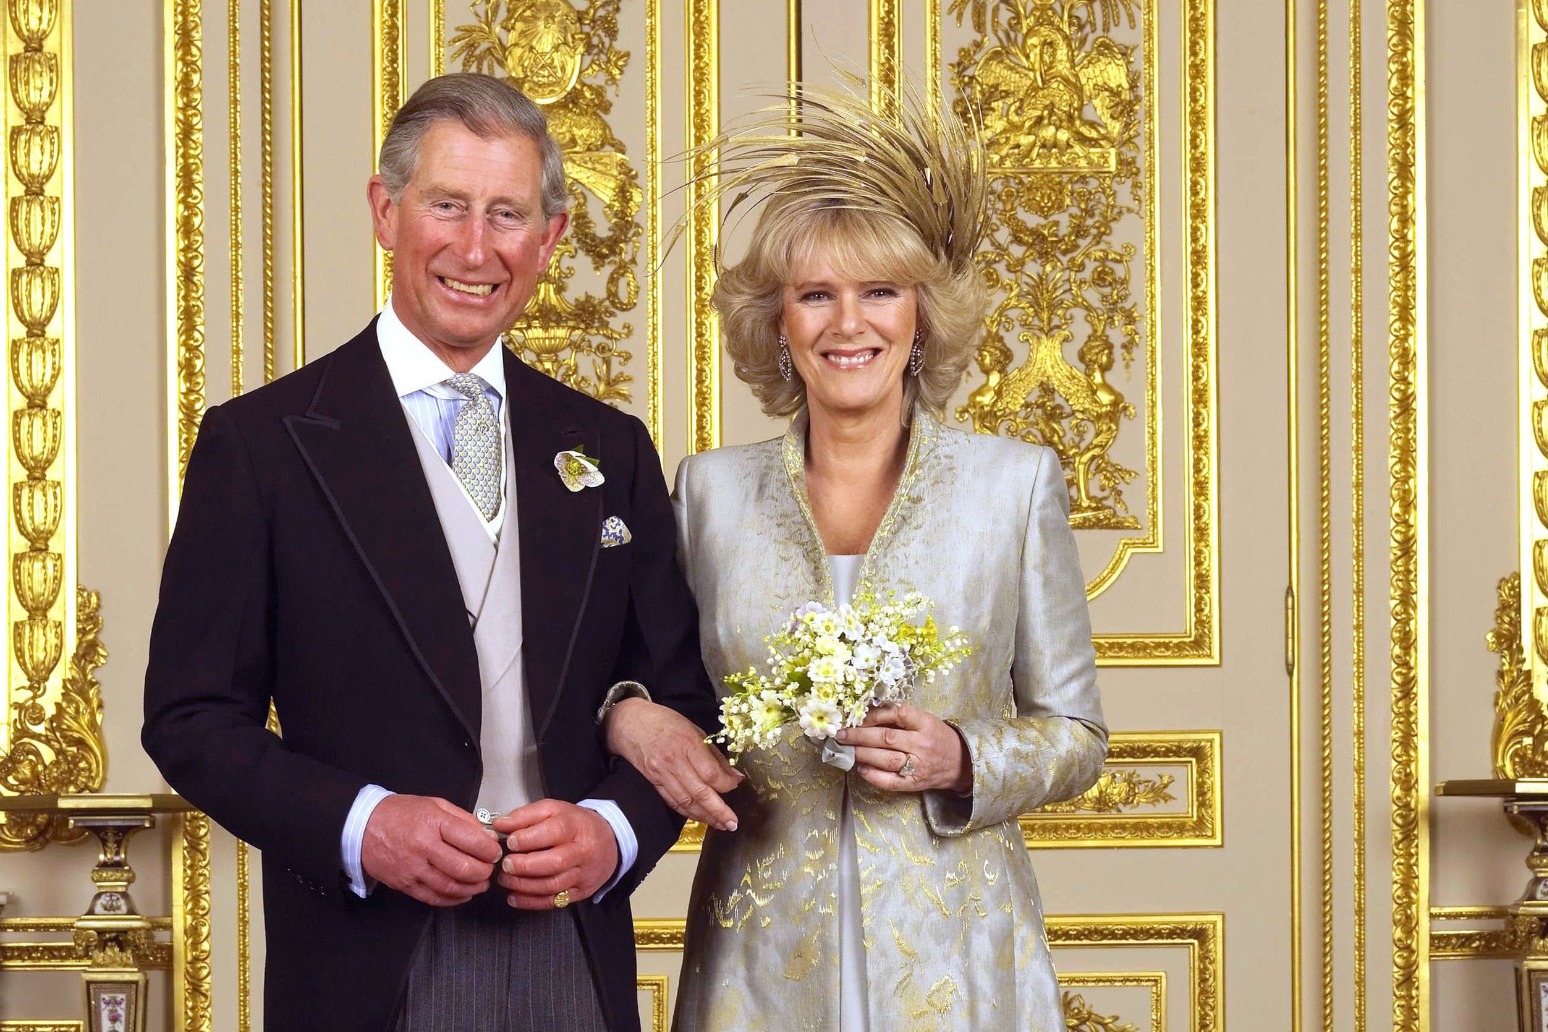 Pet dogs join Charles and Camilla in picture to mark 15th wedding anniversary 